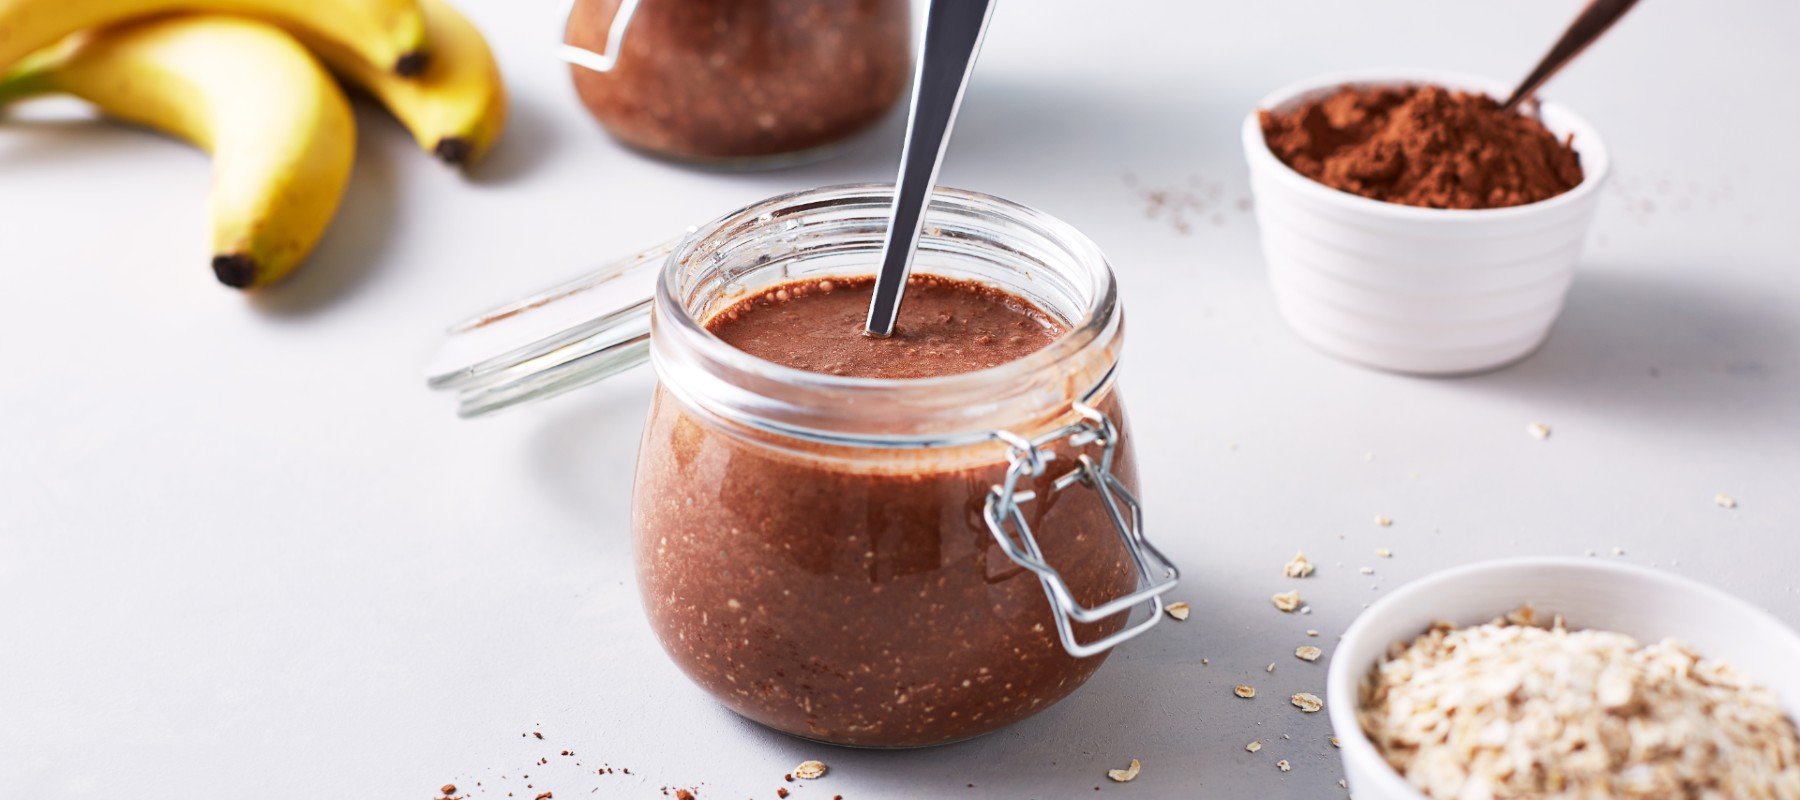 Banana & Chocolate Overnight Oats | Start Your Day Strong